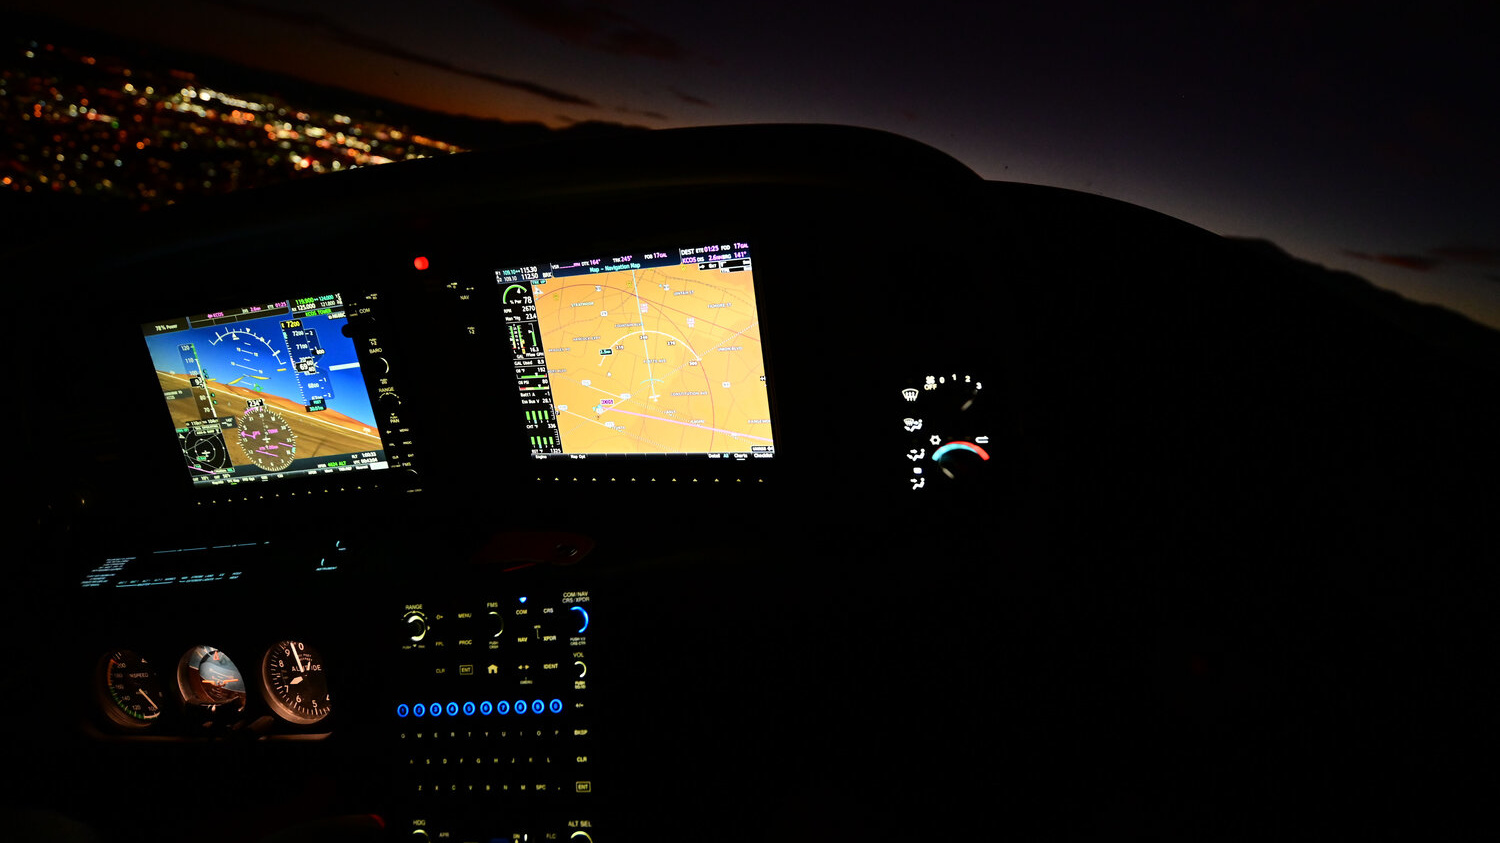 Garmin Perspective+ avionics feature a full QWERTY keyboard on the FMS for a quick and natural data entry. The large G1000 screens makes navigating and controlling this bird a snap!